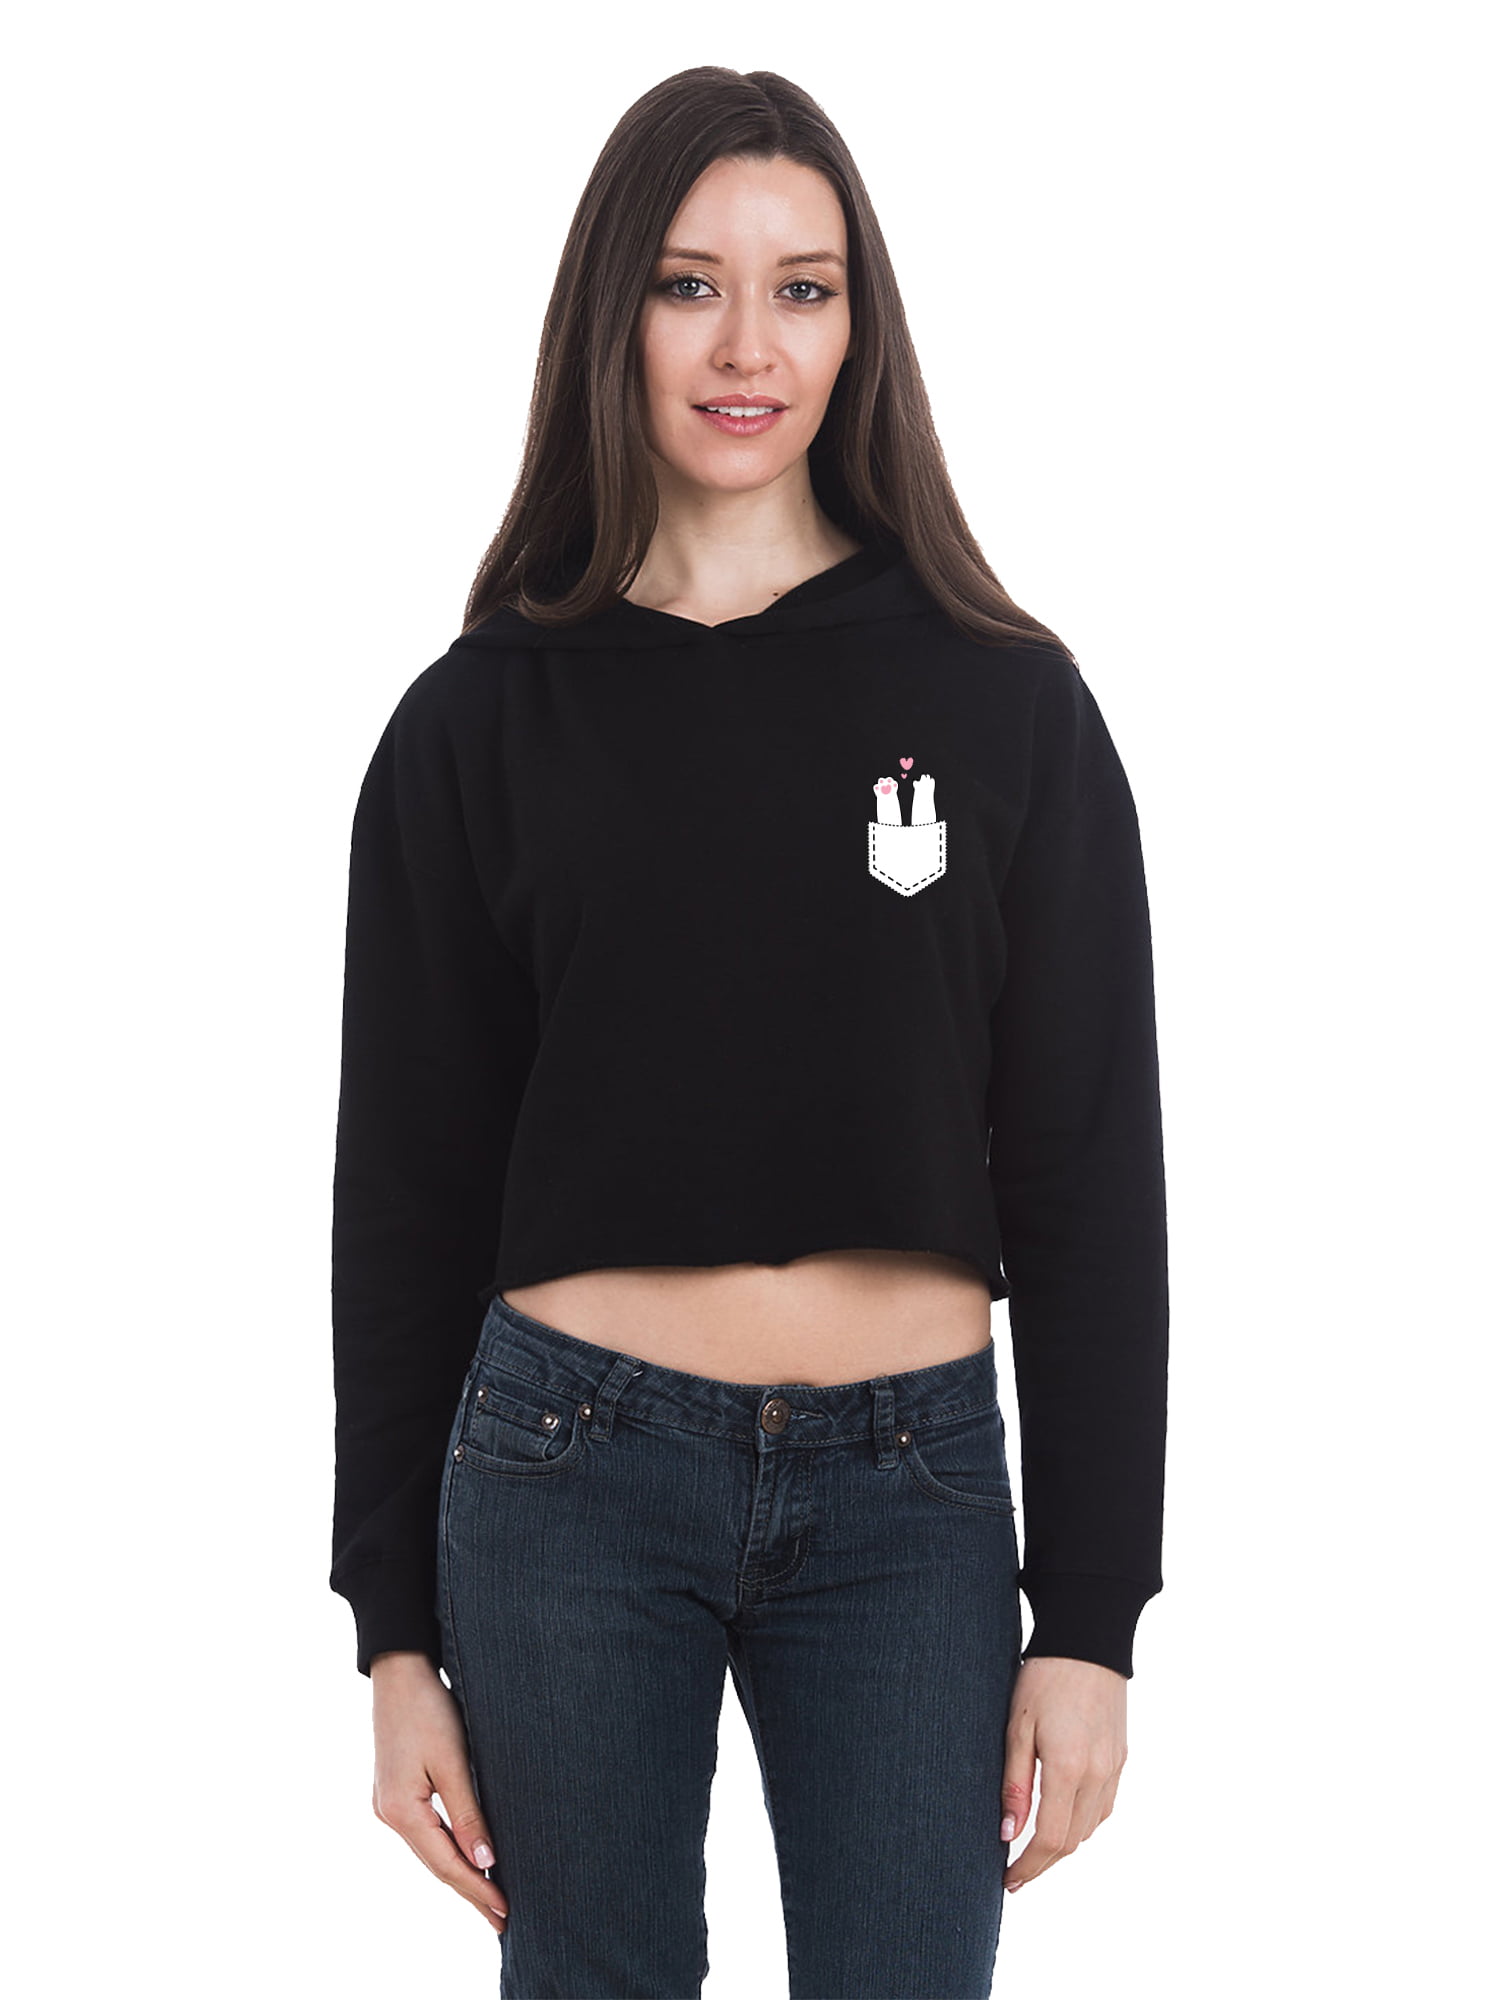 The Cure Womens 3D Print Long Sleeve Crop Top Pullover Hooded 